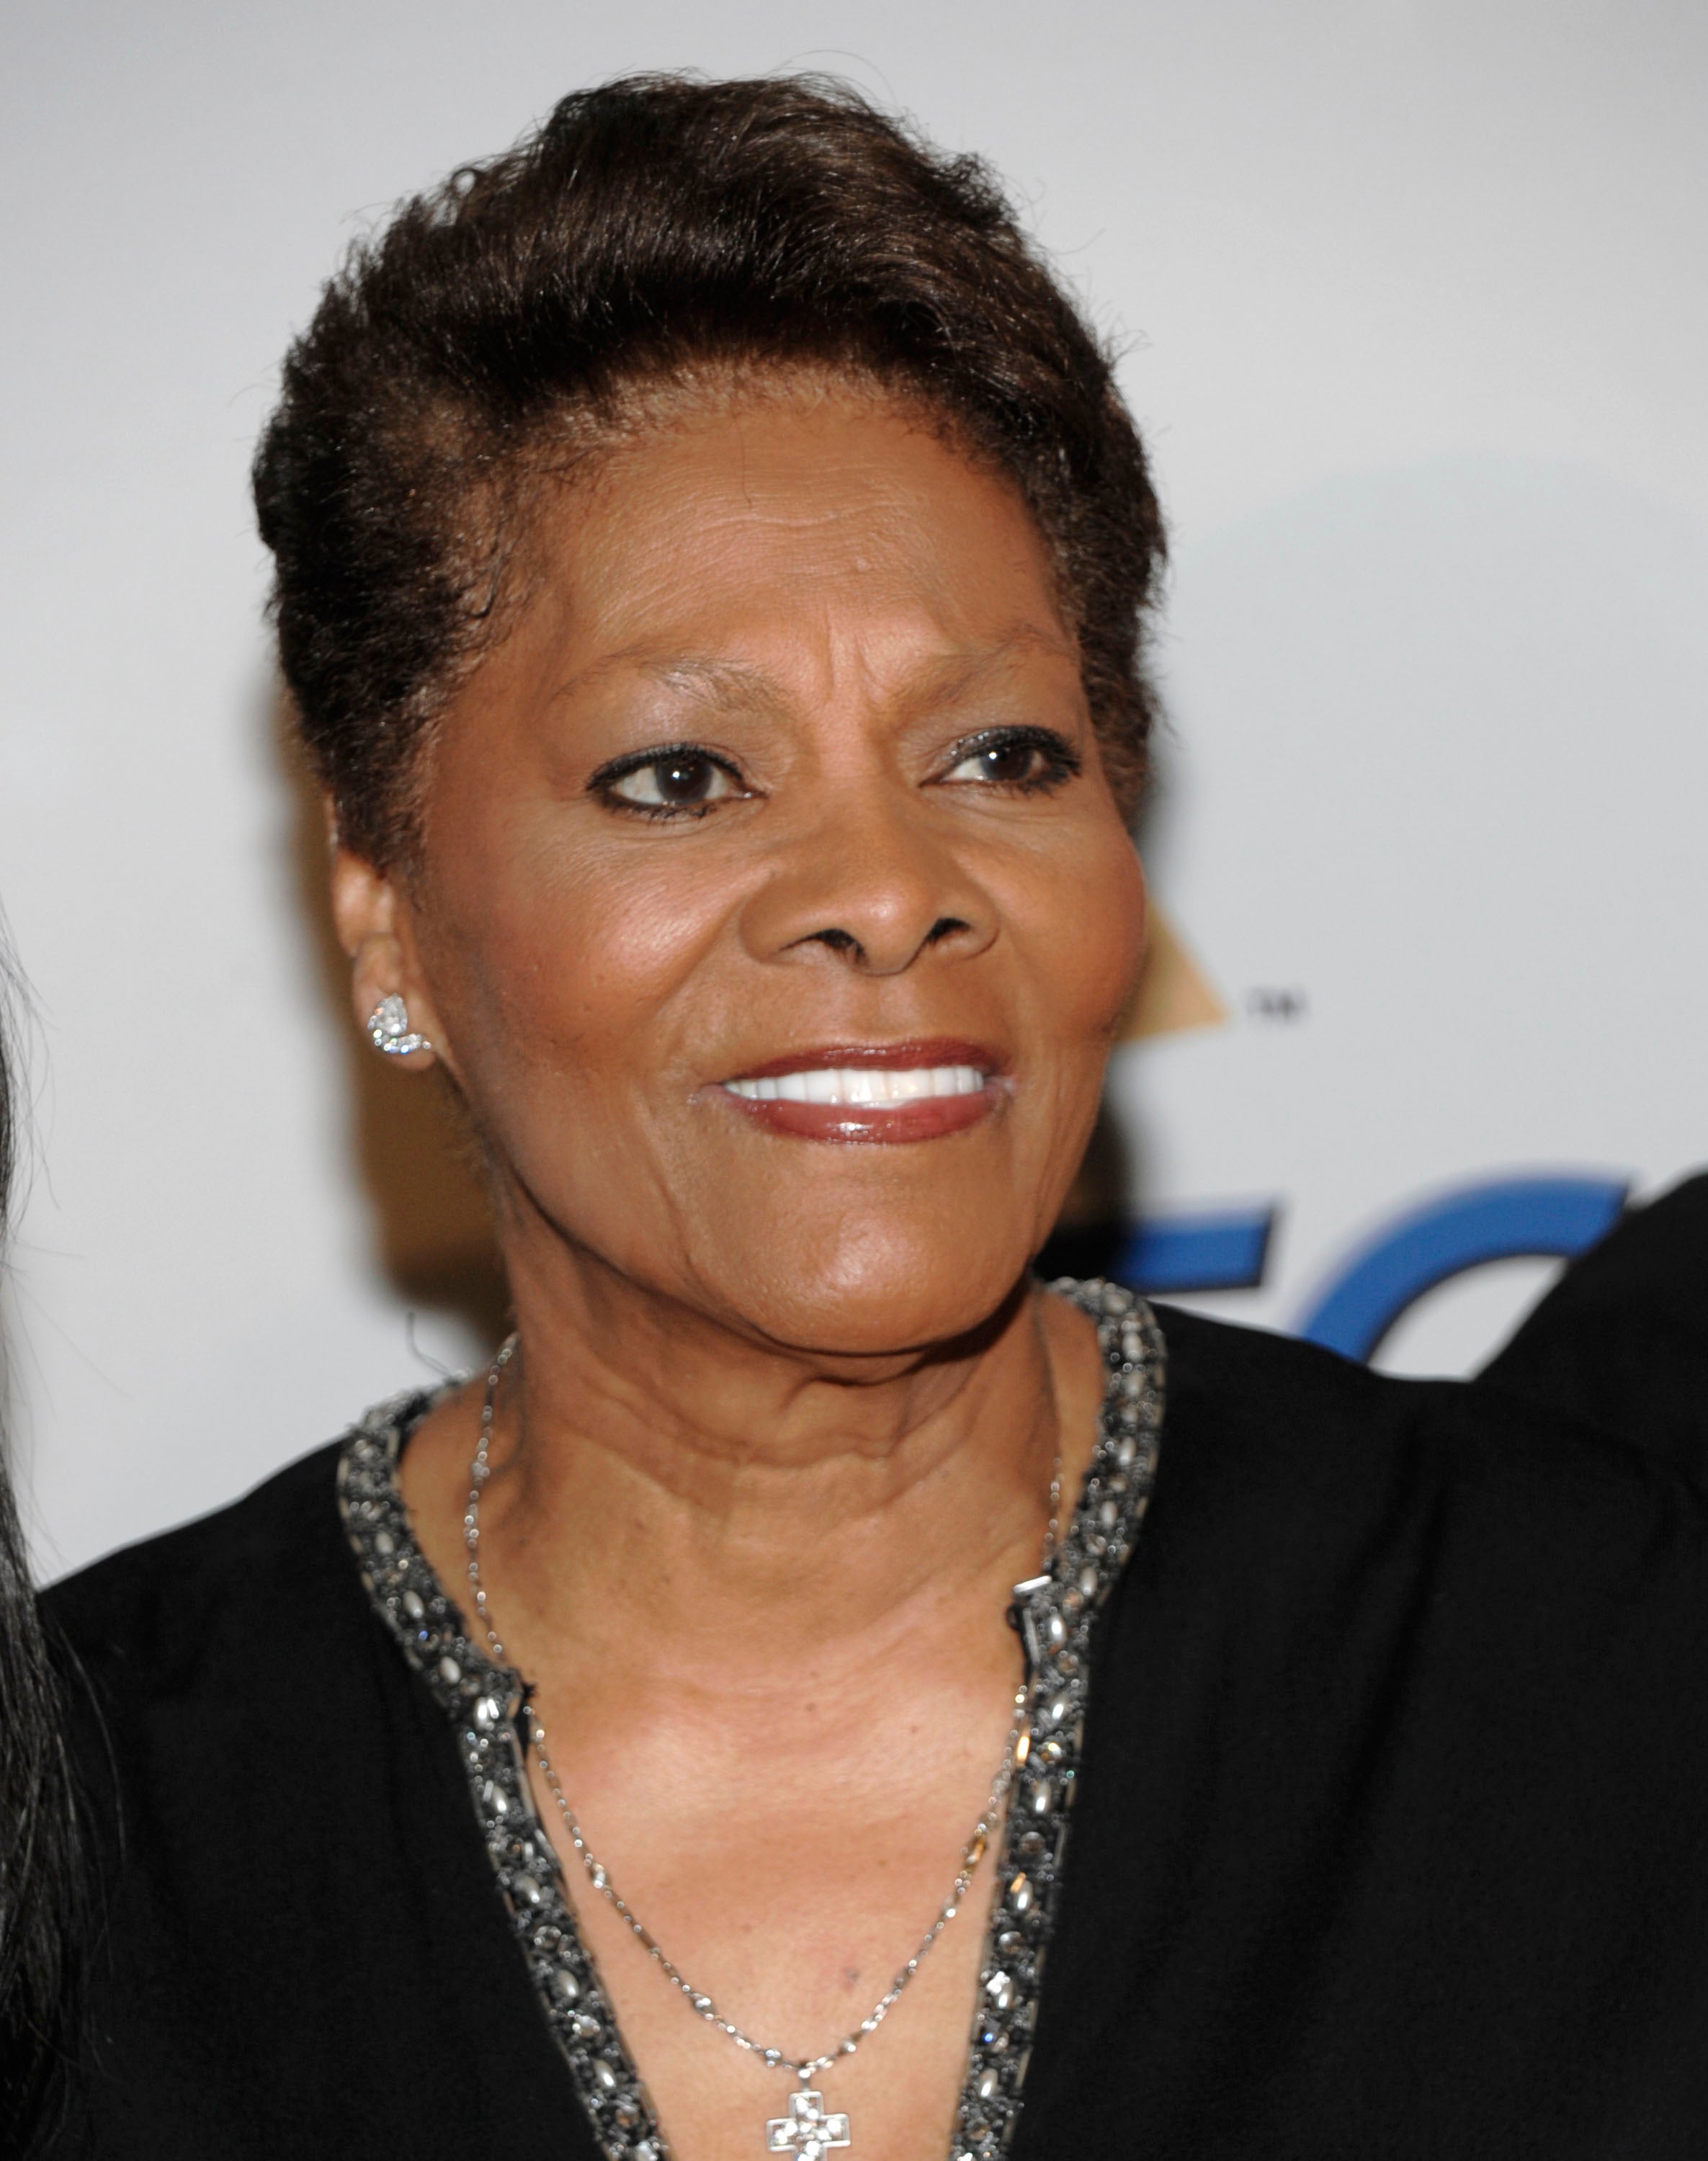 Dionne Warwick Files for Bankruptcy Over Tax Liens